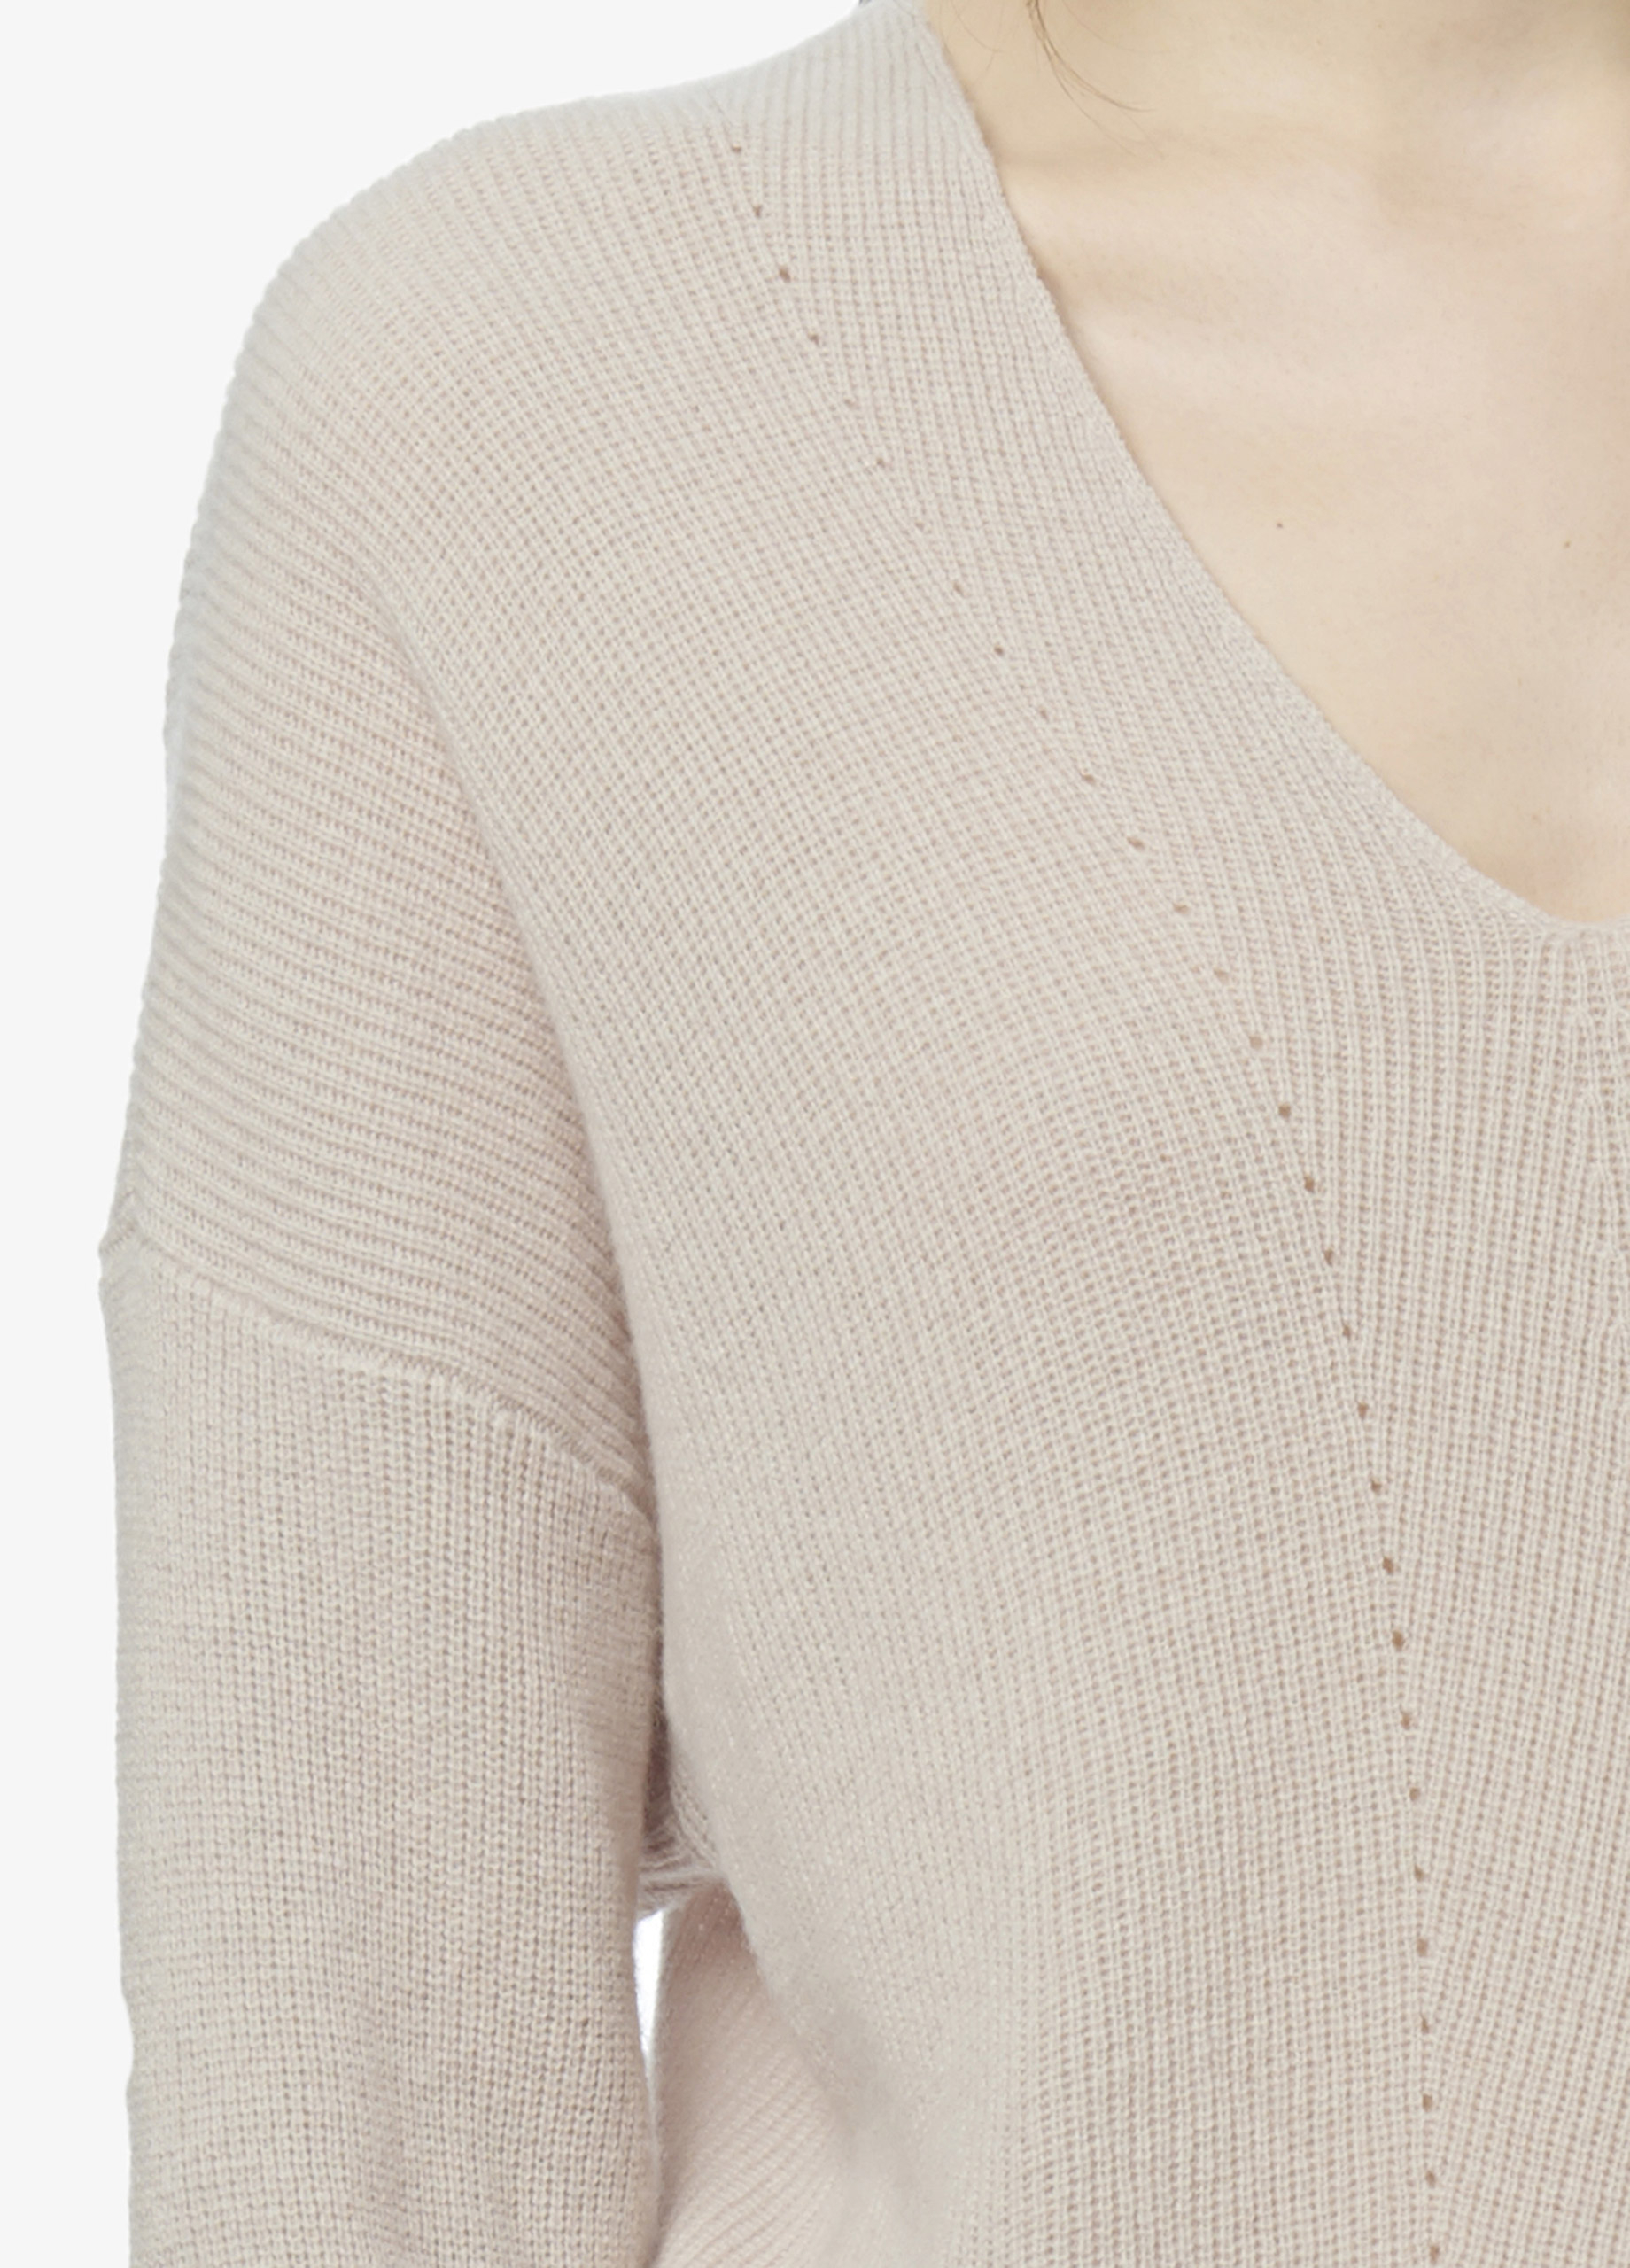 Vince Cashmere Rack Stitch Boatneck Sweater in Natural - Lyst